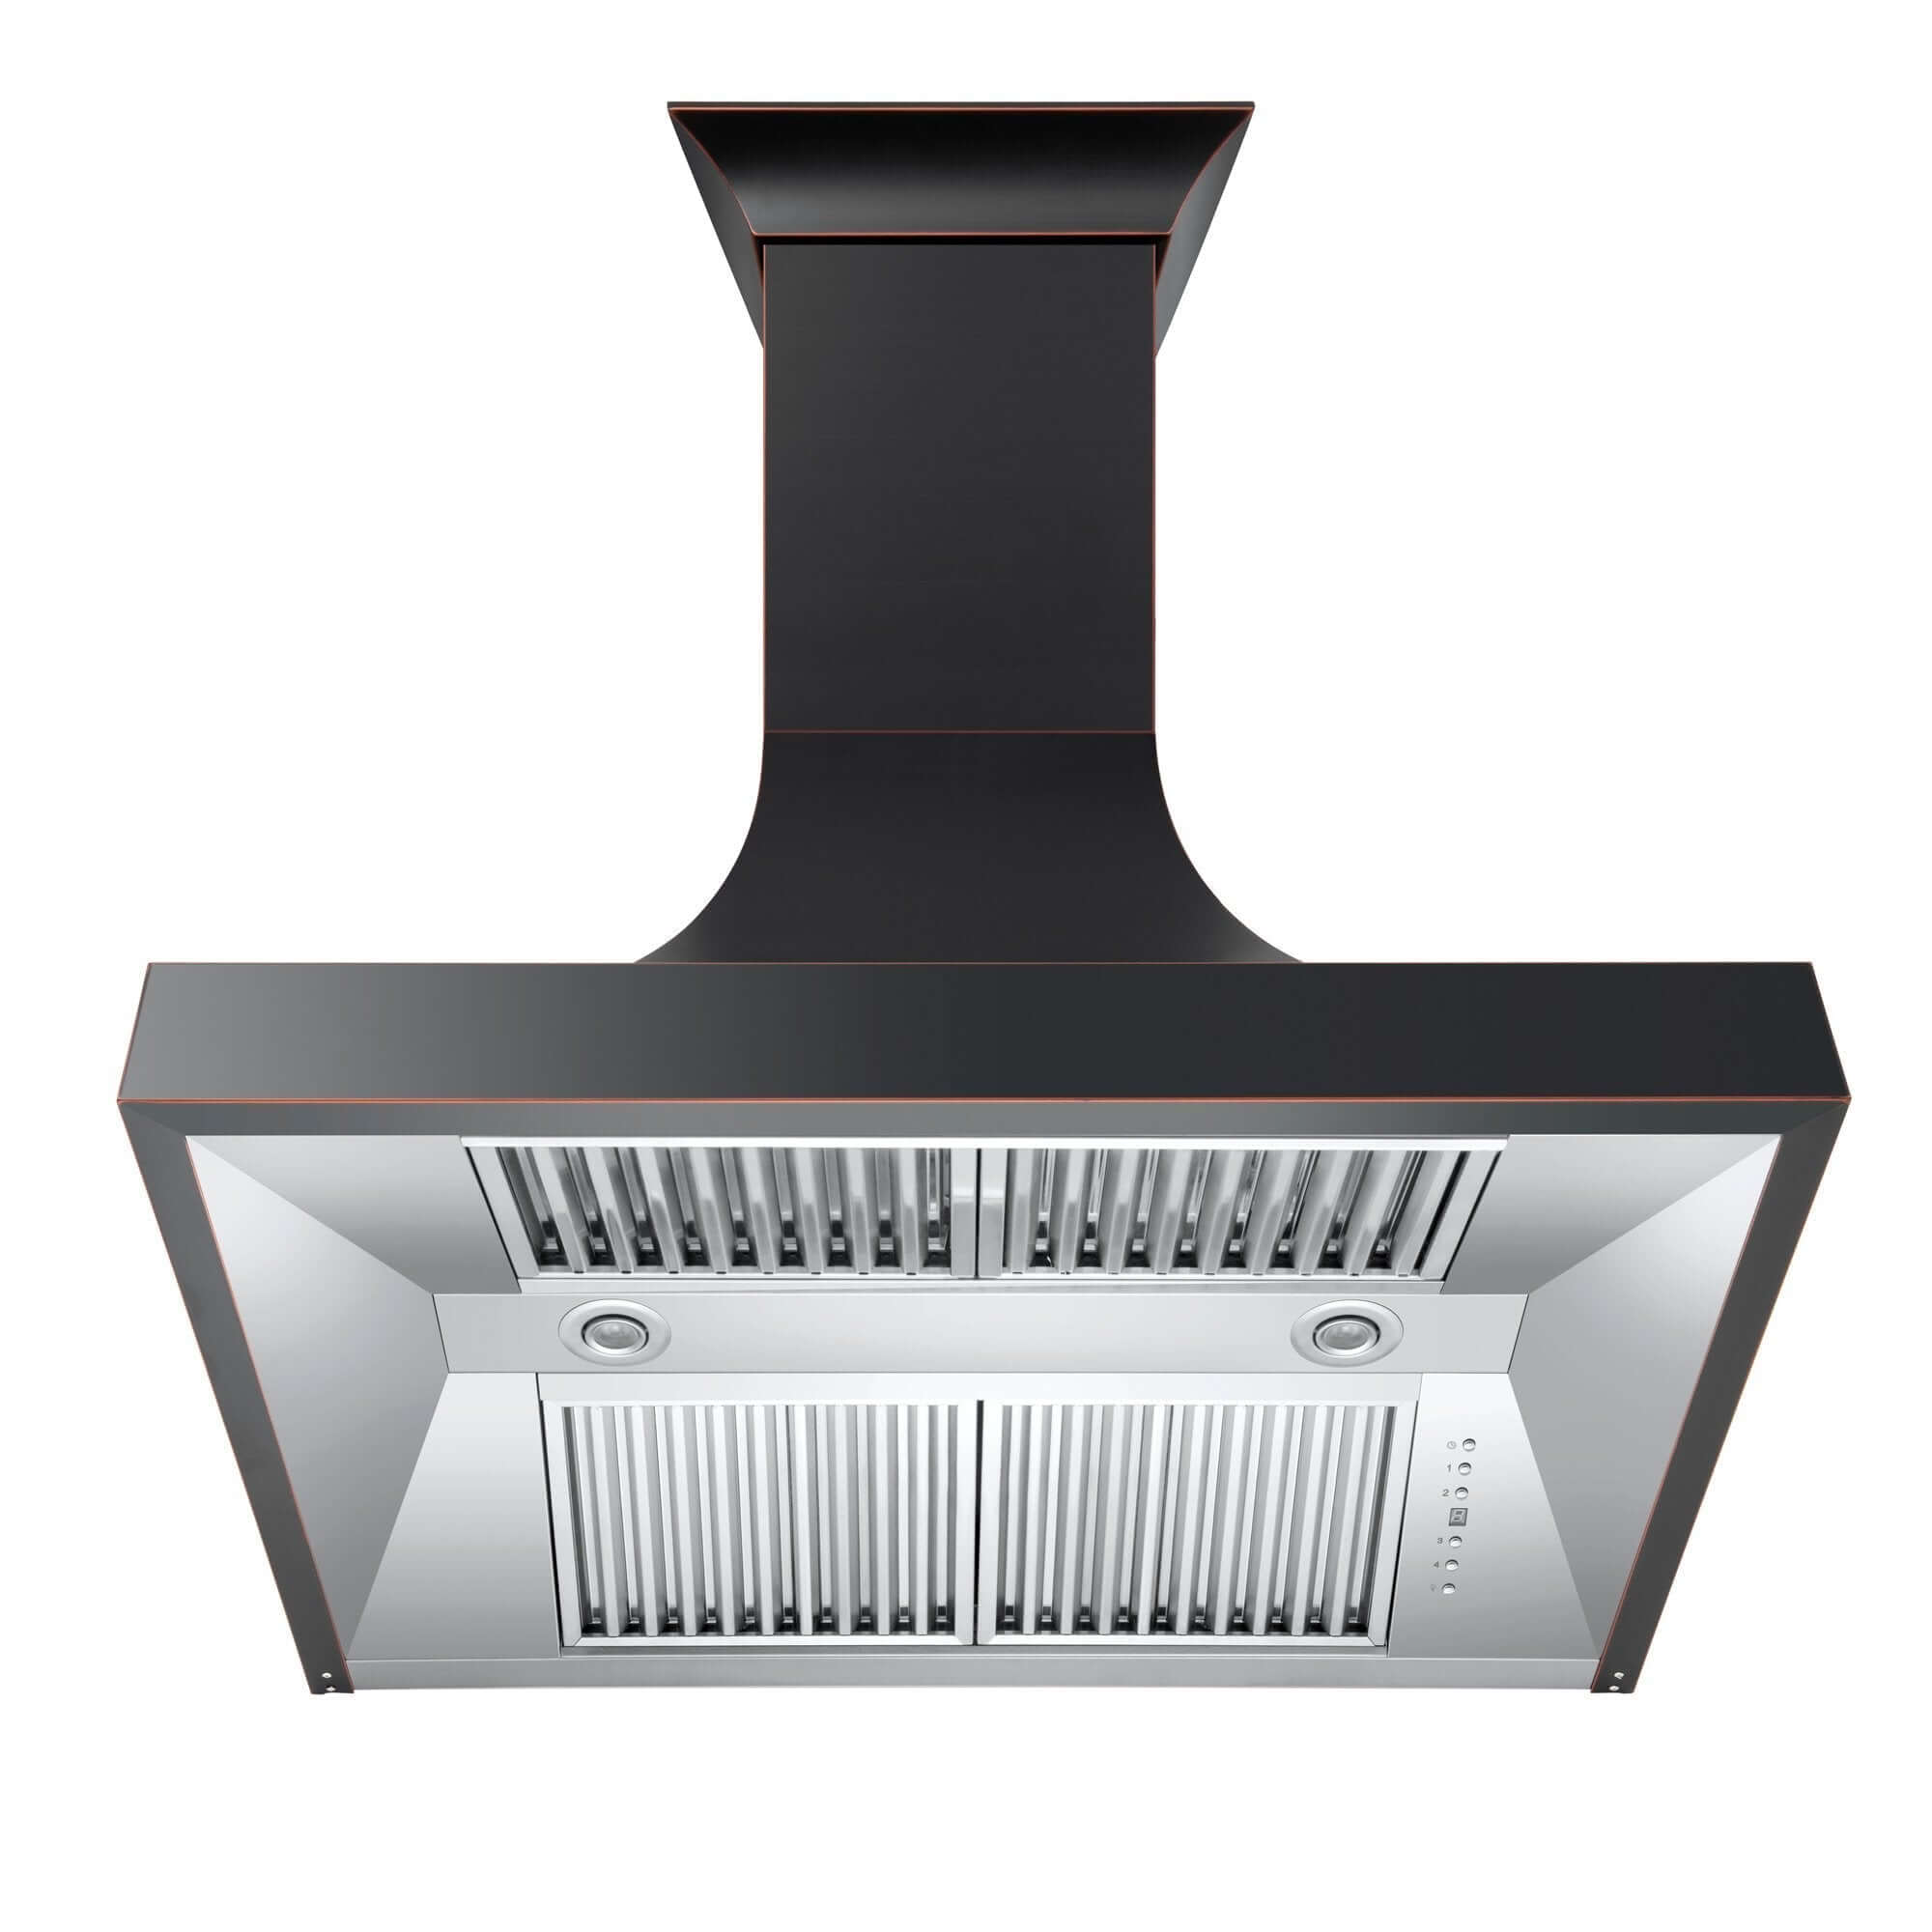 ZLINE Designer Series Oil-Rubbed Bronze Wall Range Hood (8632B) under showing baffle filters, LED lighting, and button control panel with display.